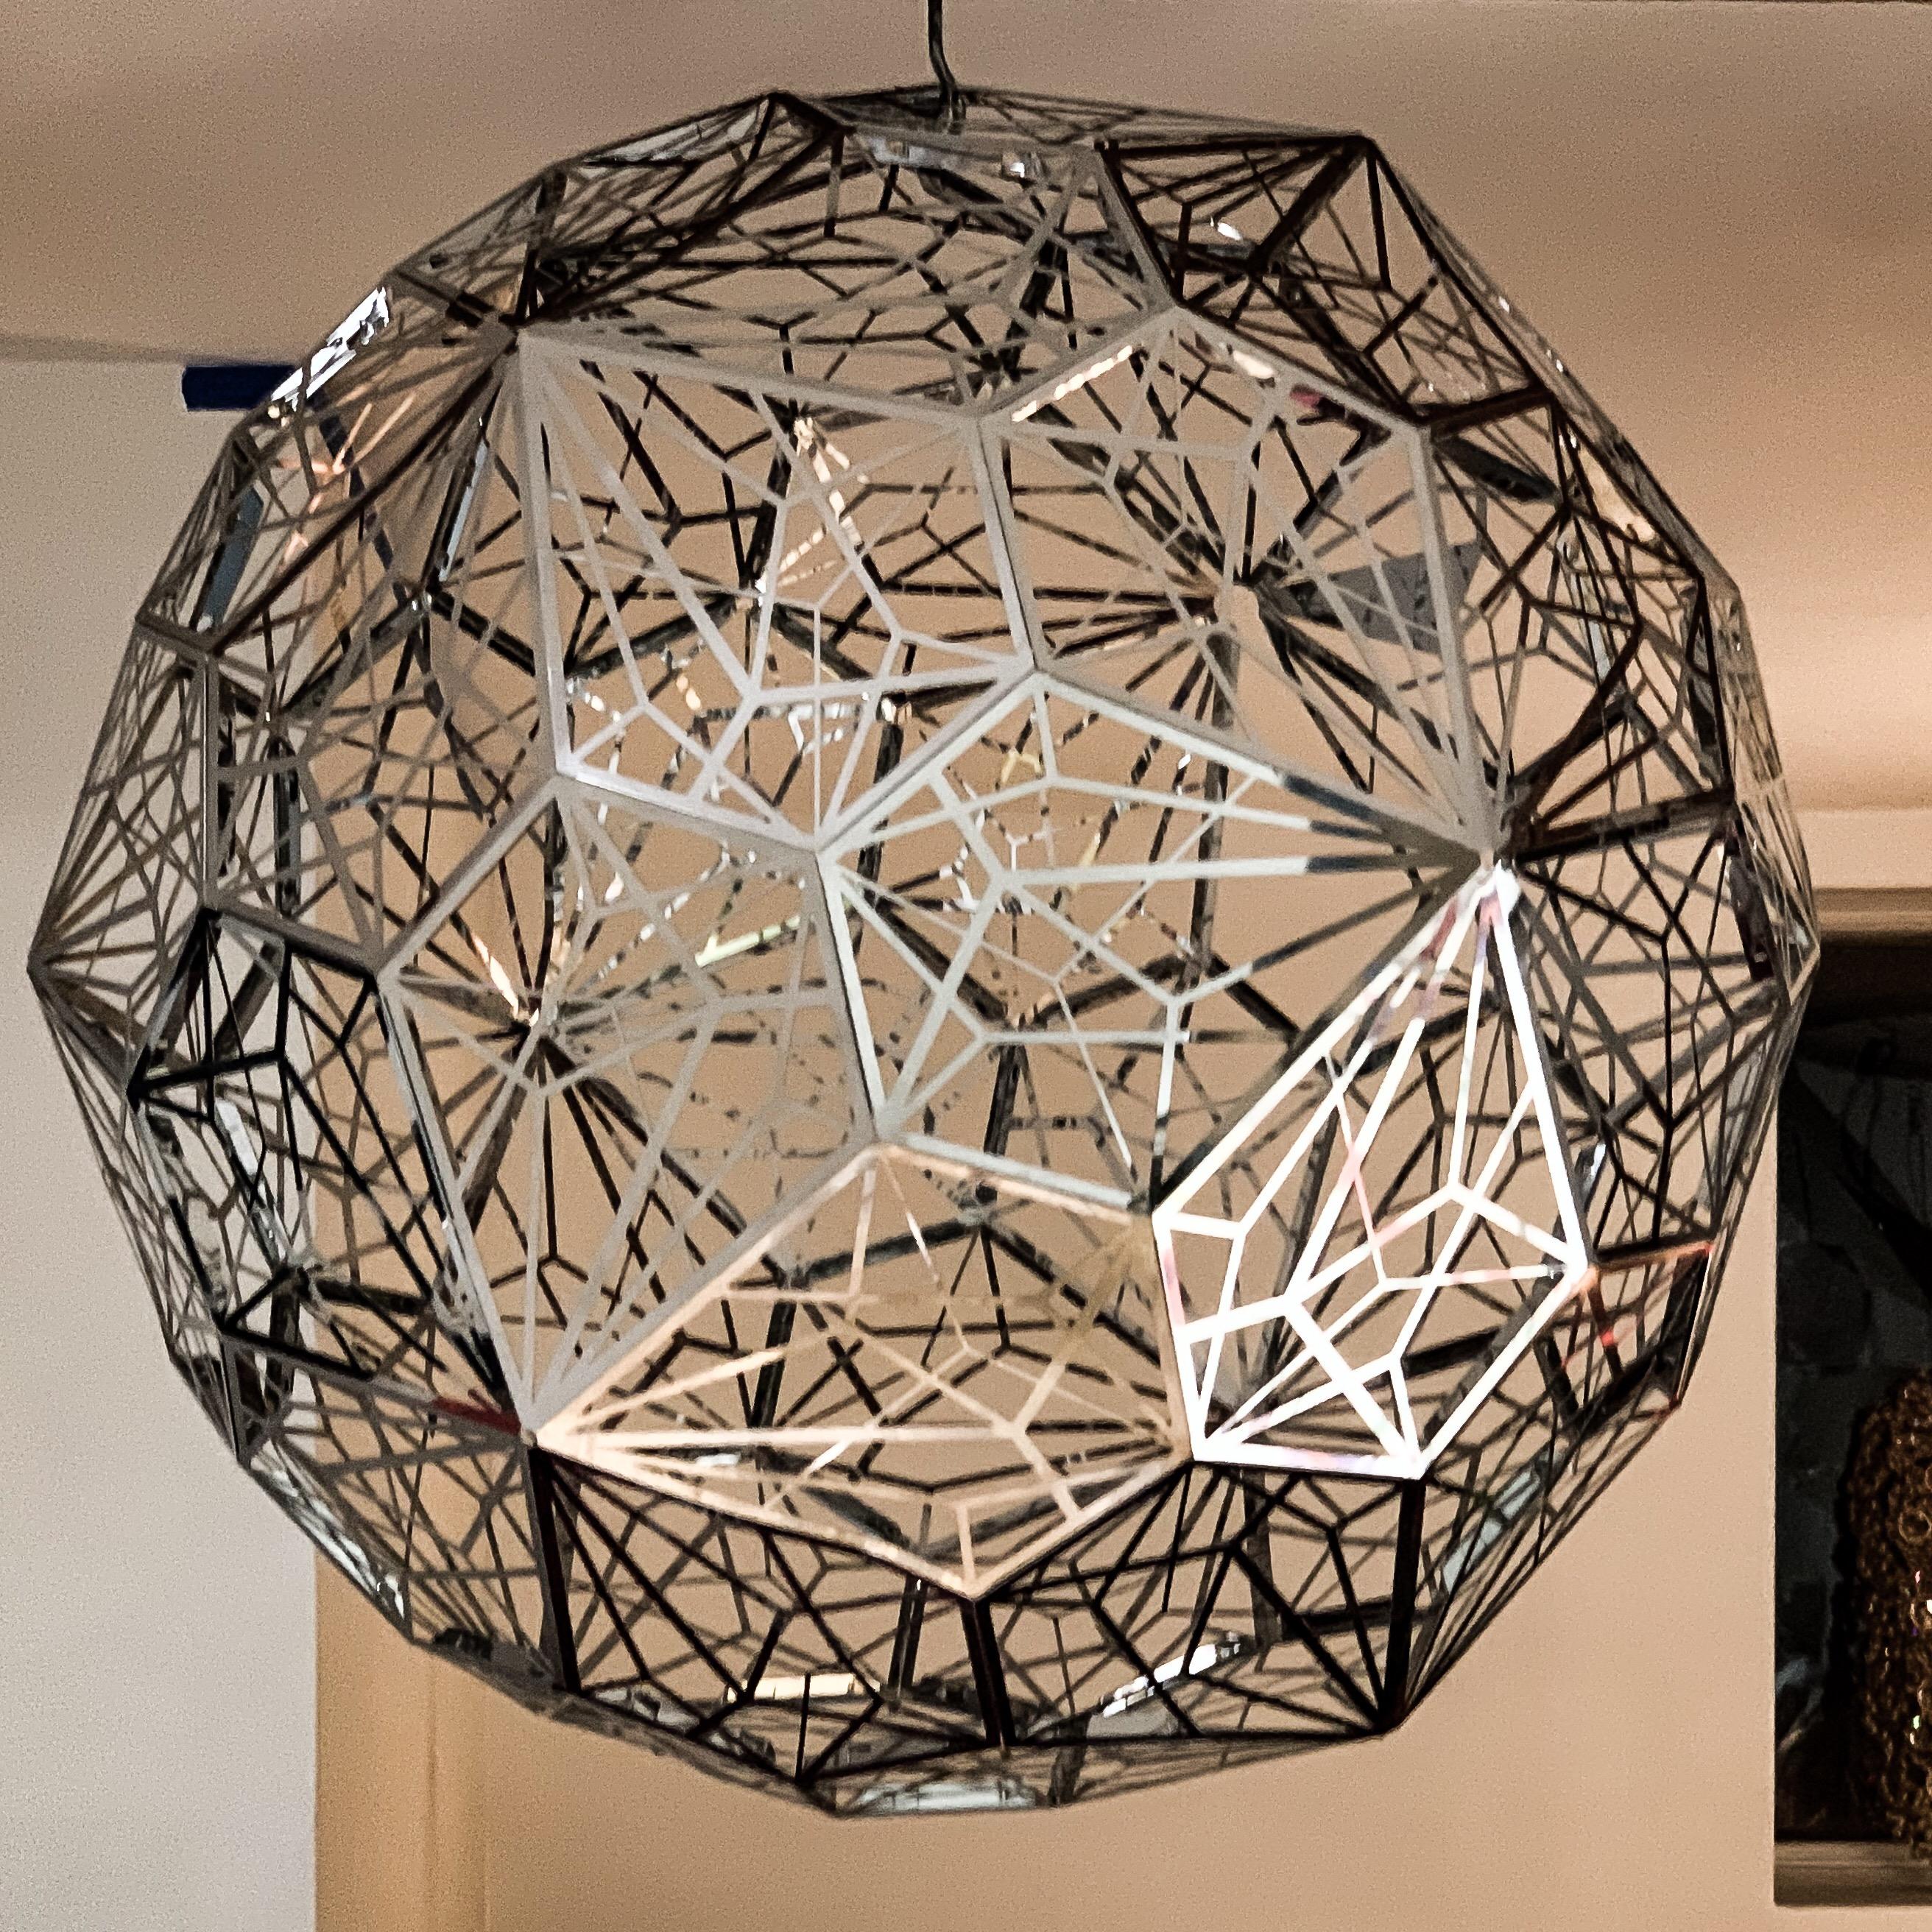 The Etch Web Pendant Light is a vast shade with an unusual open structure, designed to cast atmospheric angular shadows when lit. Another experiment in Tom Dixon's long-running exploration of mathematics and geometry, an irregular pentagon shape is